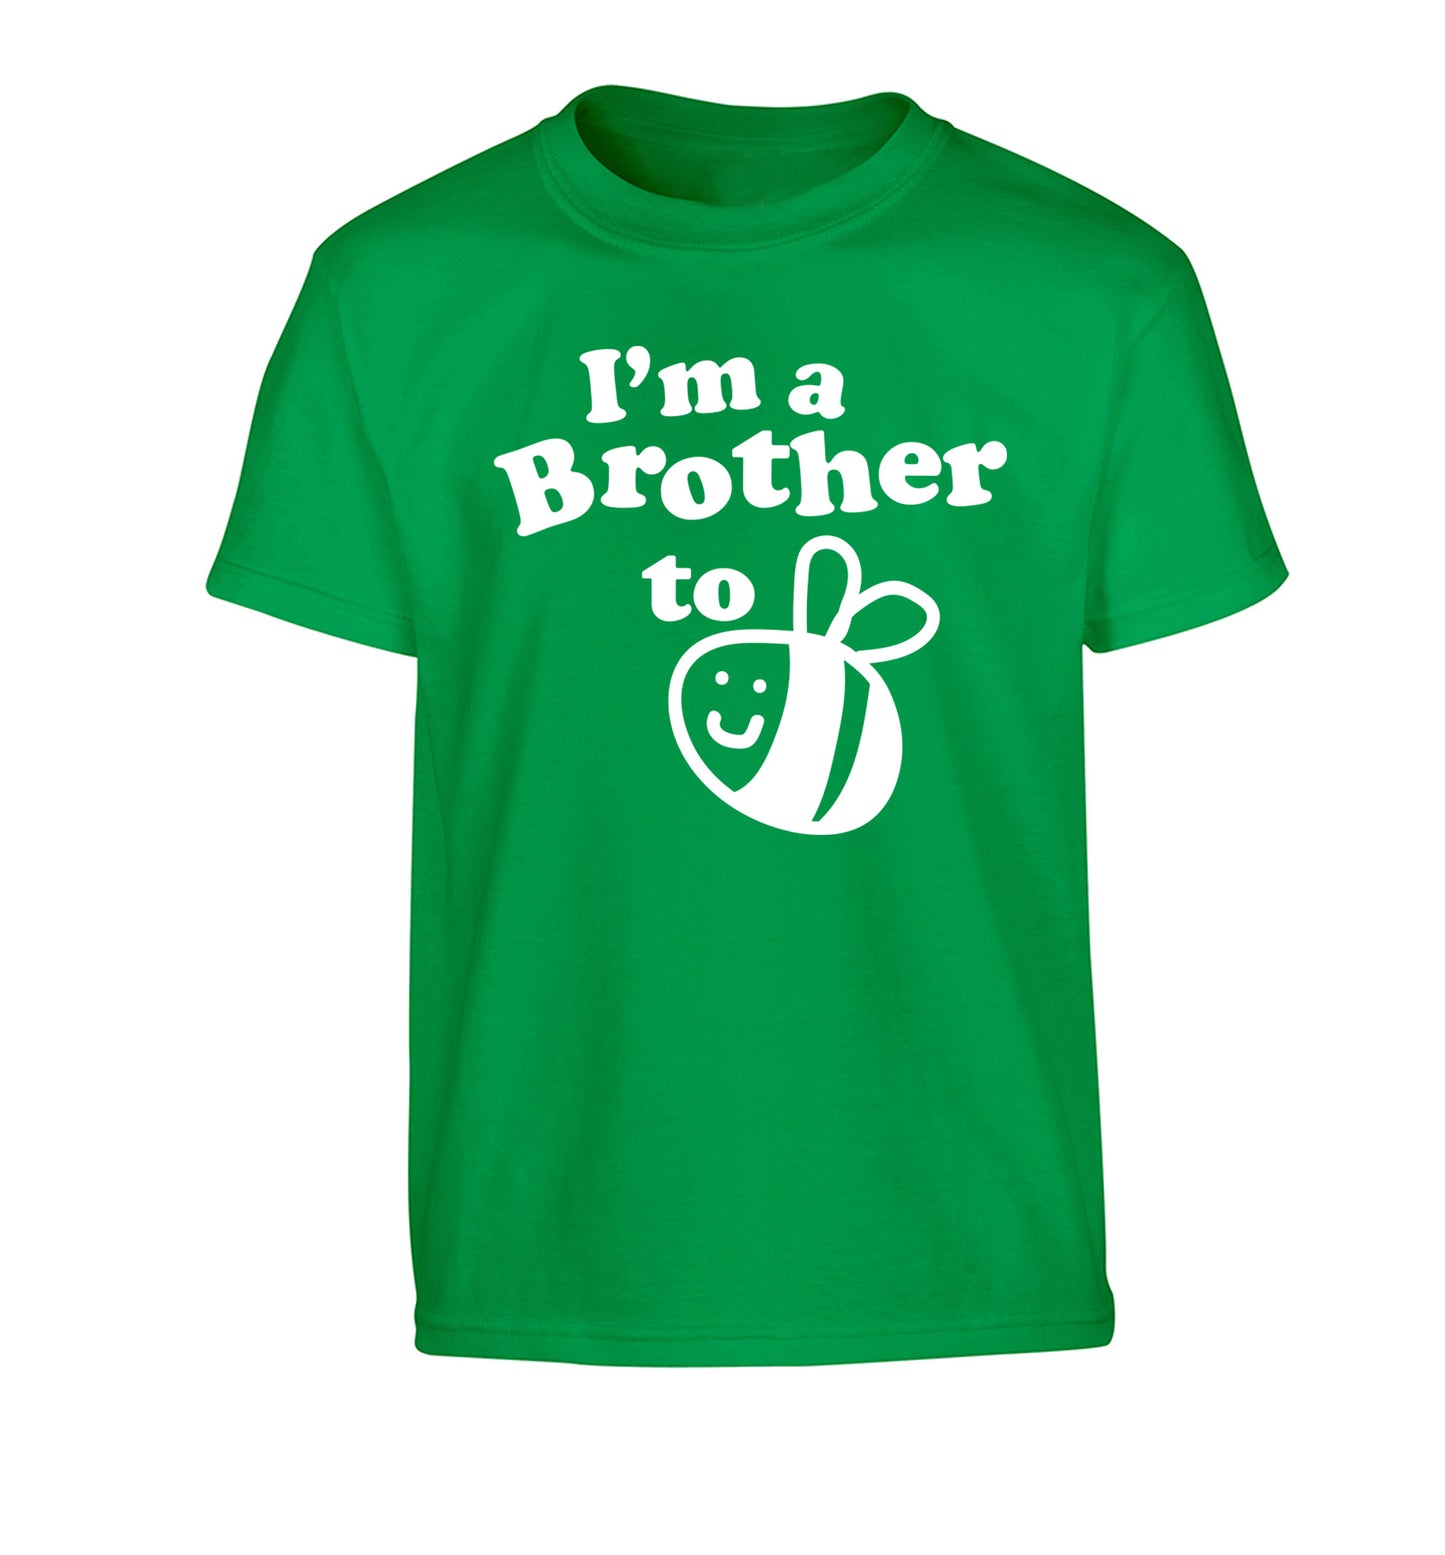 I'm a brother to be Children's green Tshirt 12-14 Years